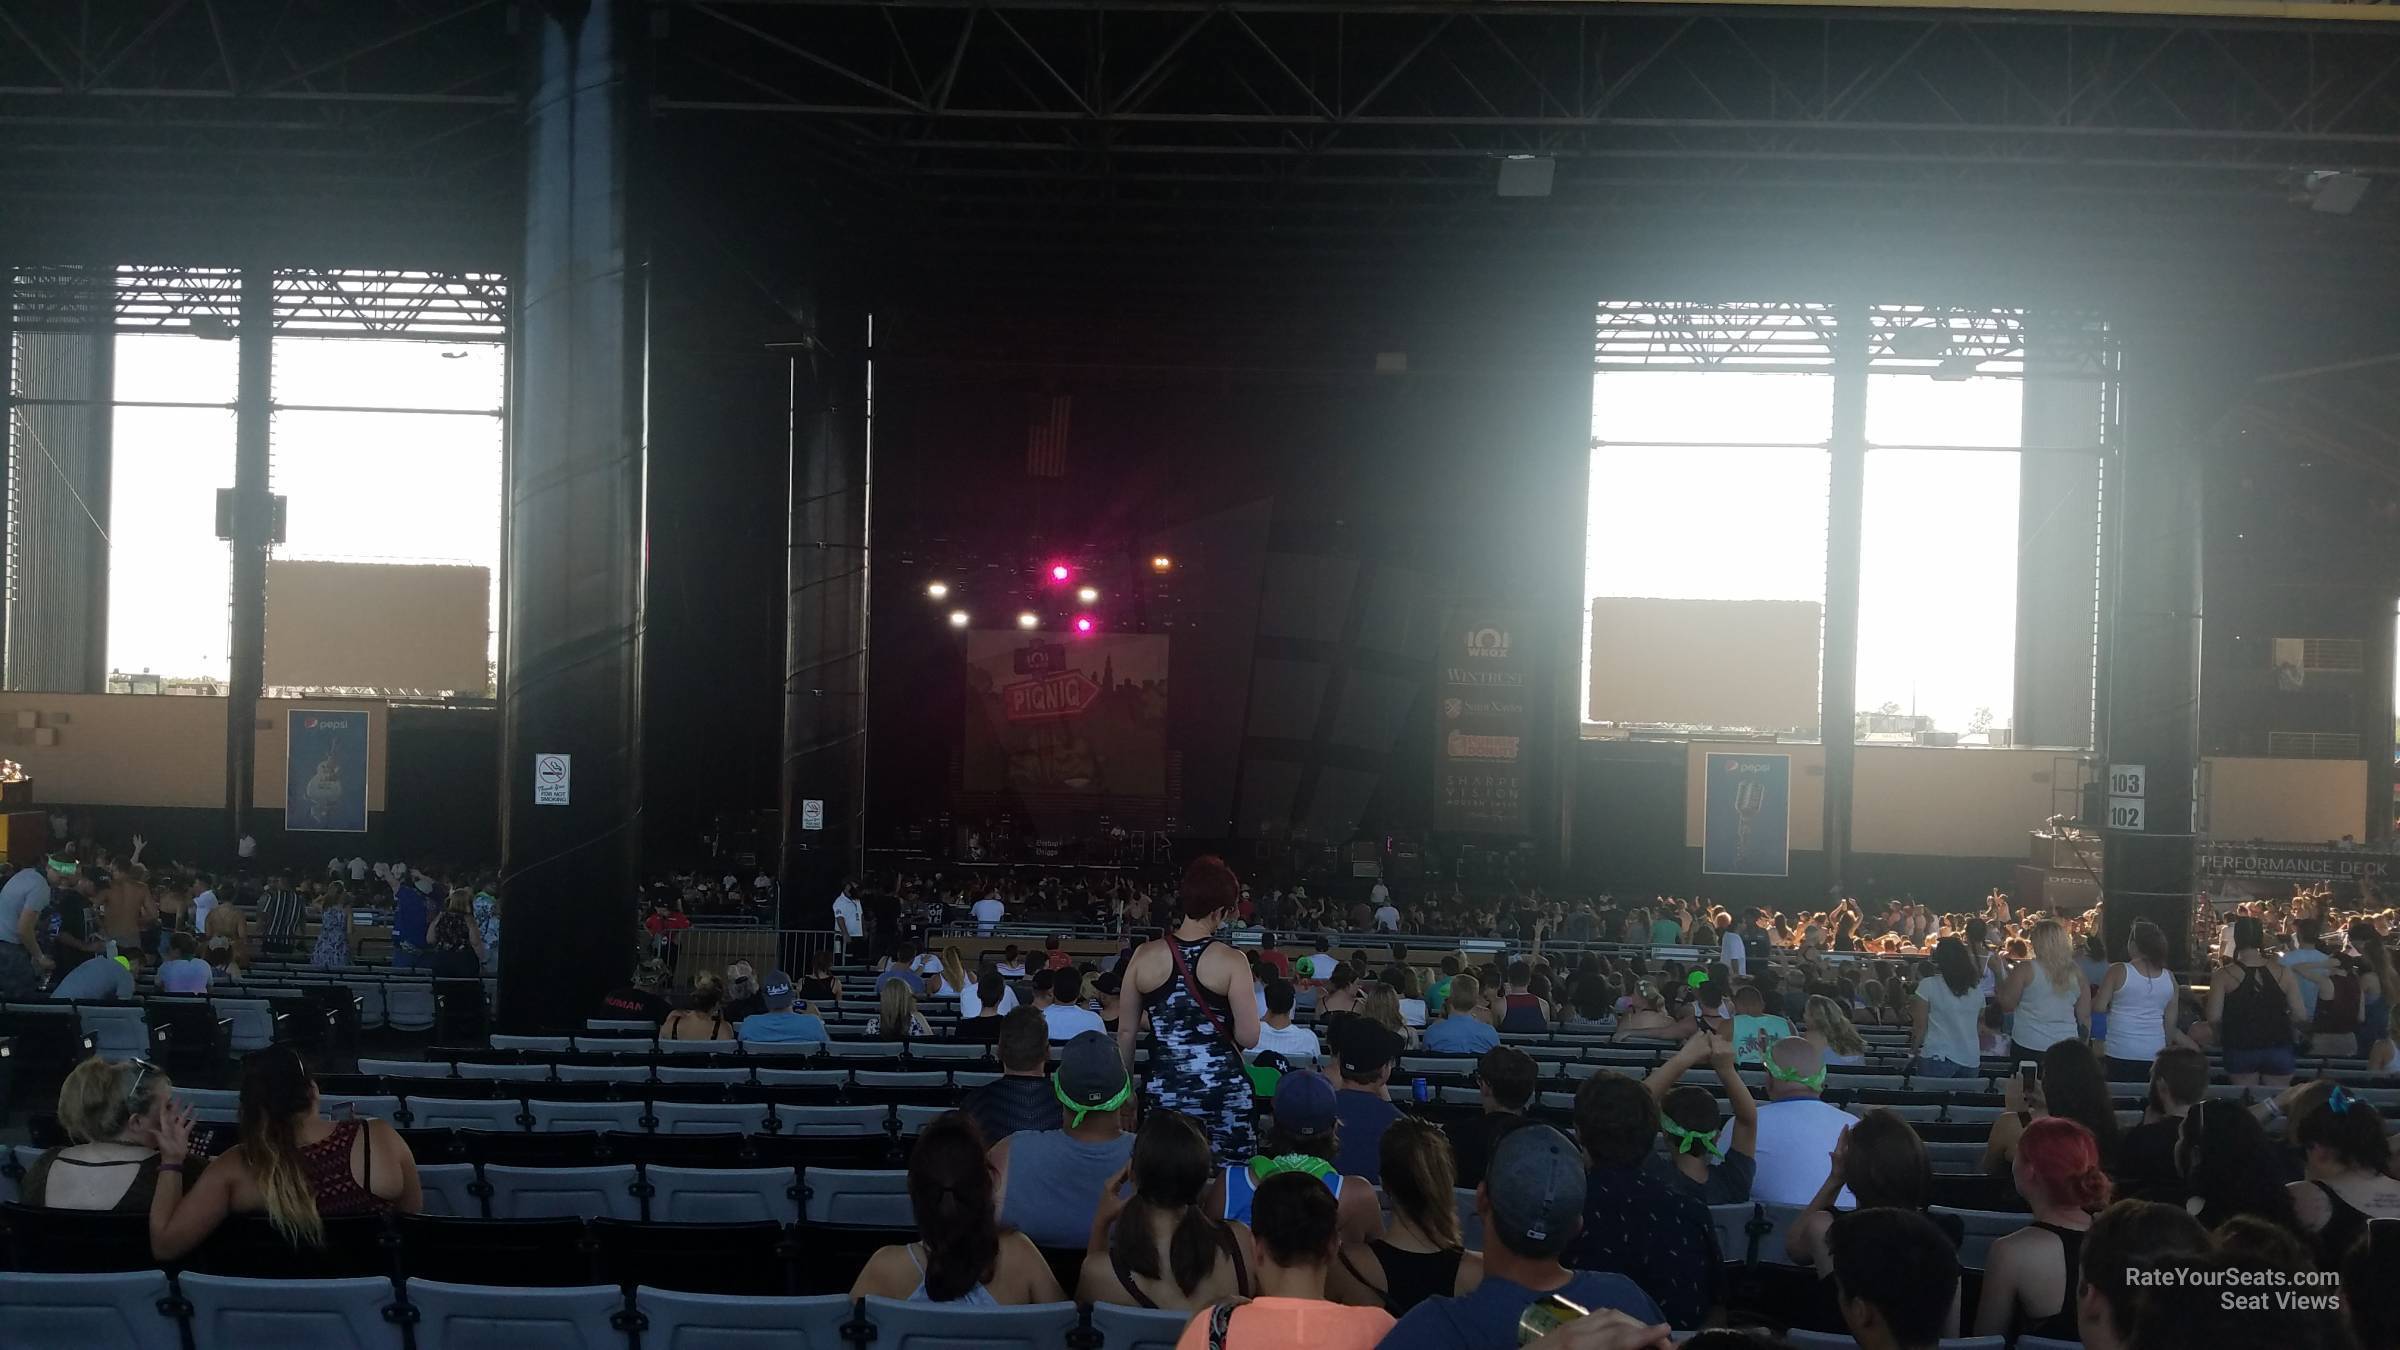 section 204, row mmm seat view  - credit union 1 amphitheatre